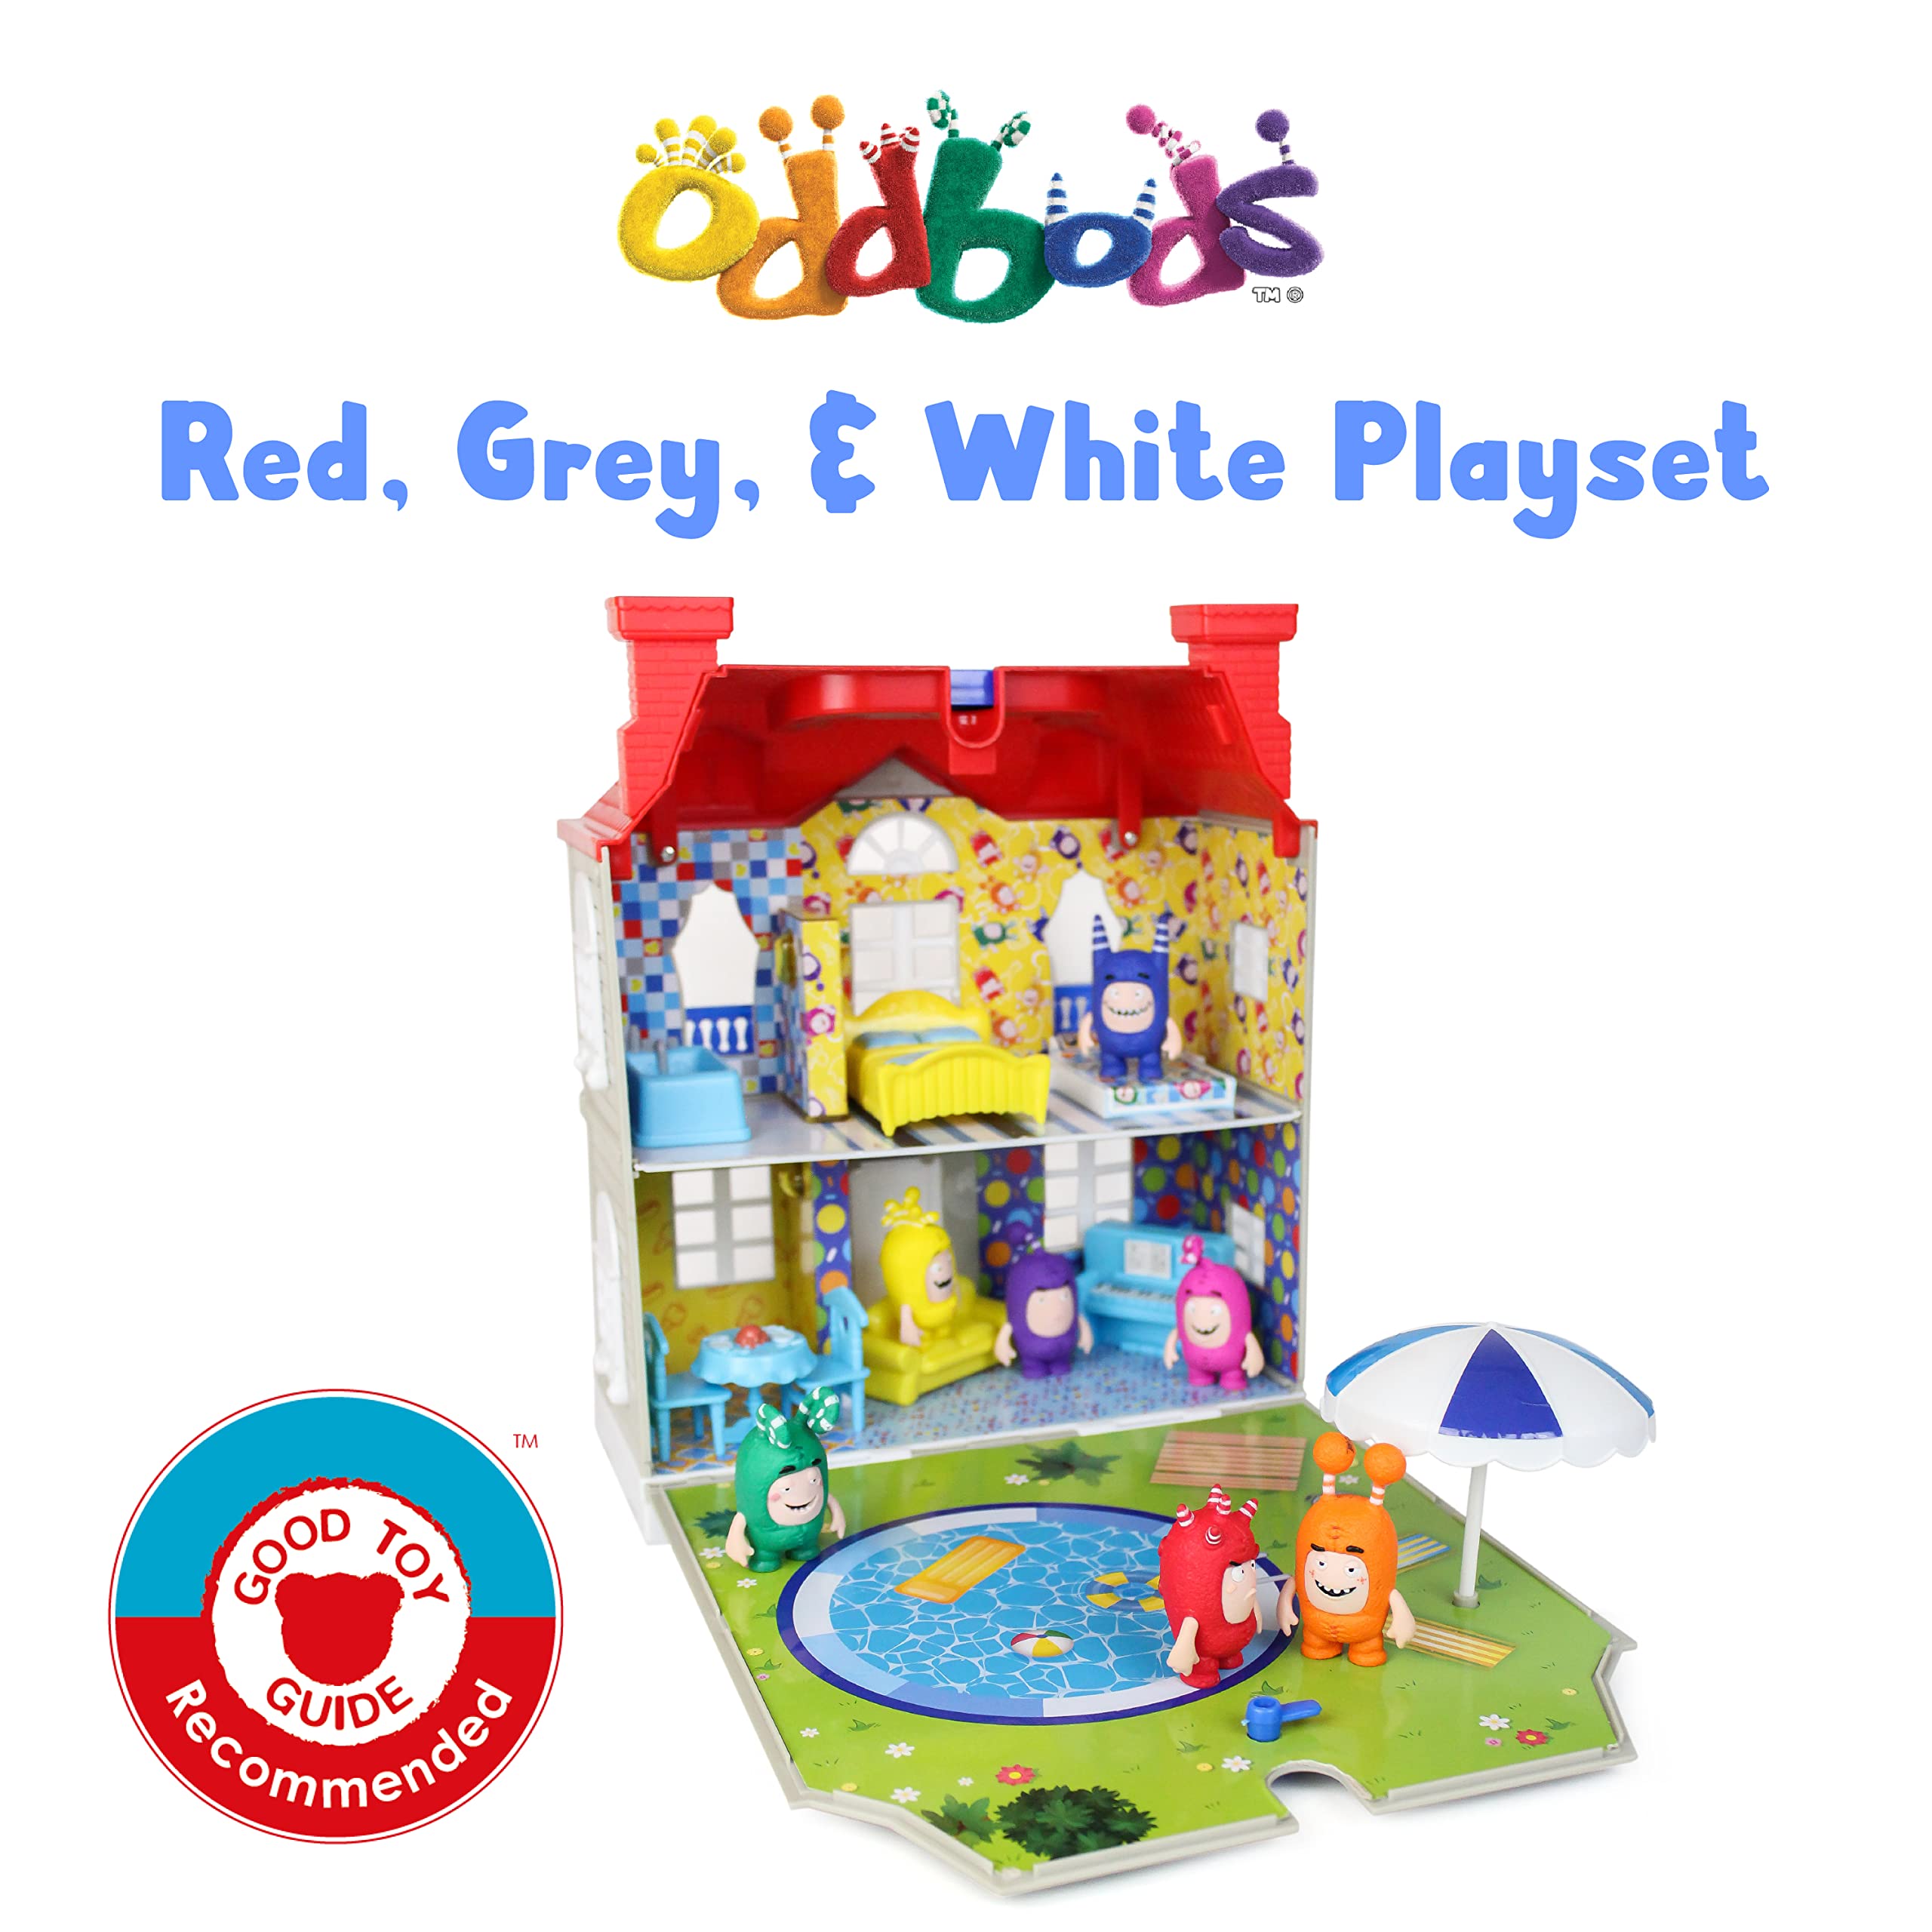 ODDBODS Red, White, and Grey House Playset for Kids - Features Indoor and Outdoor Spaces with Furniture and 7 Detailed Figurines, Ages 3+